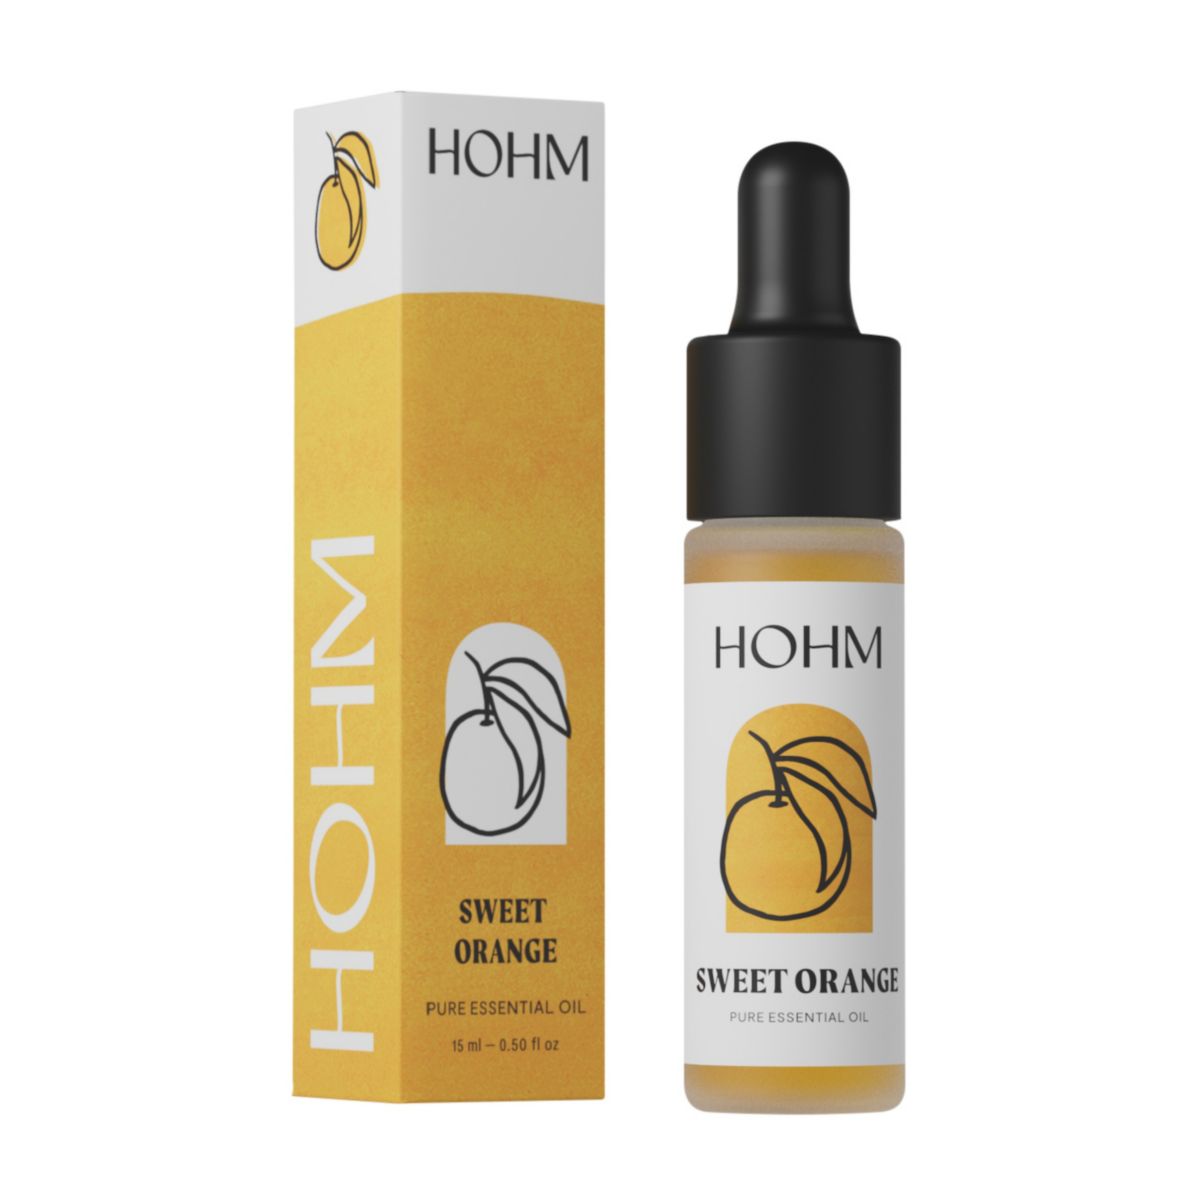 Hohm Sweet Orange Essential Oil - Natural, Pure Essential Oil for Your Home Diffuser - 15 mL HOHM